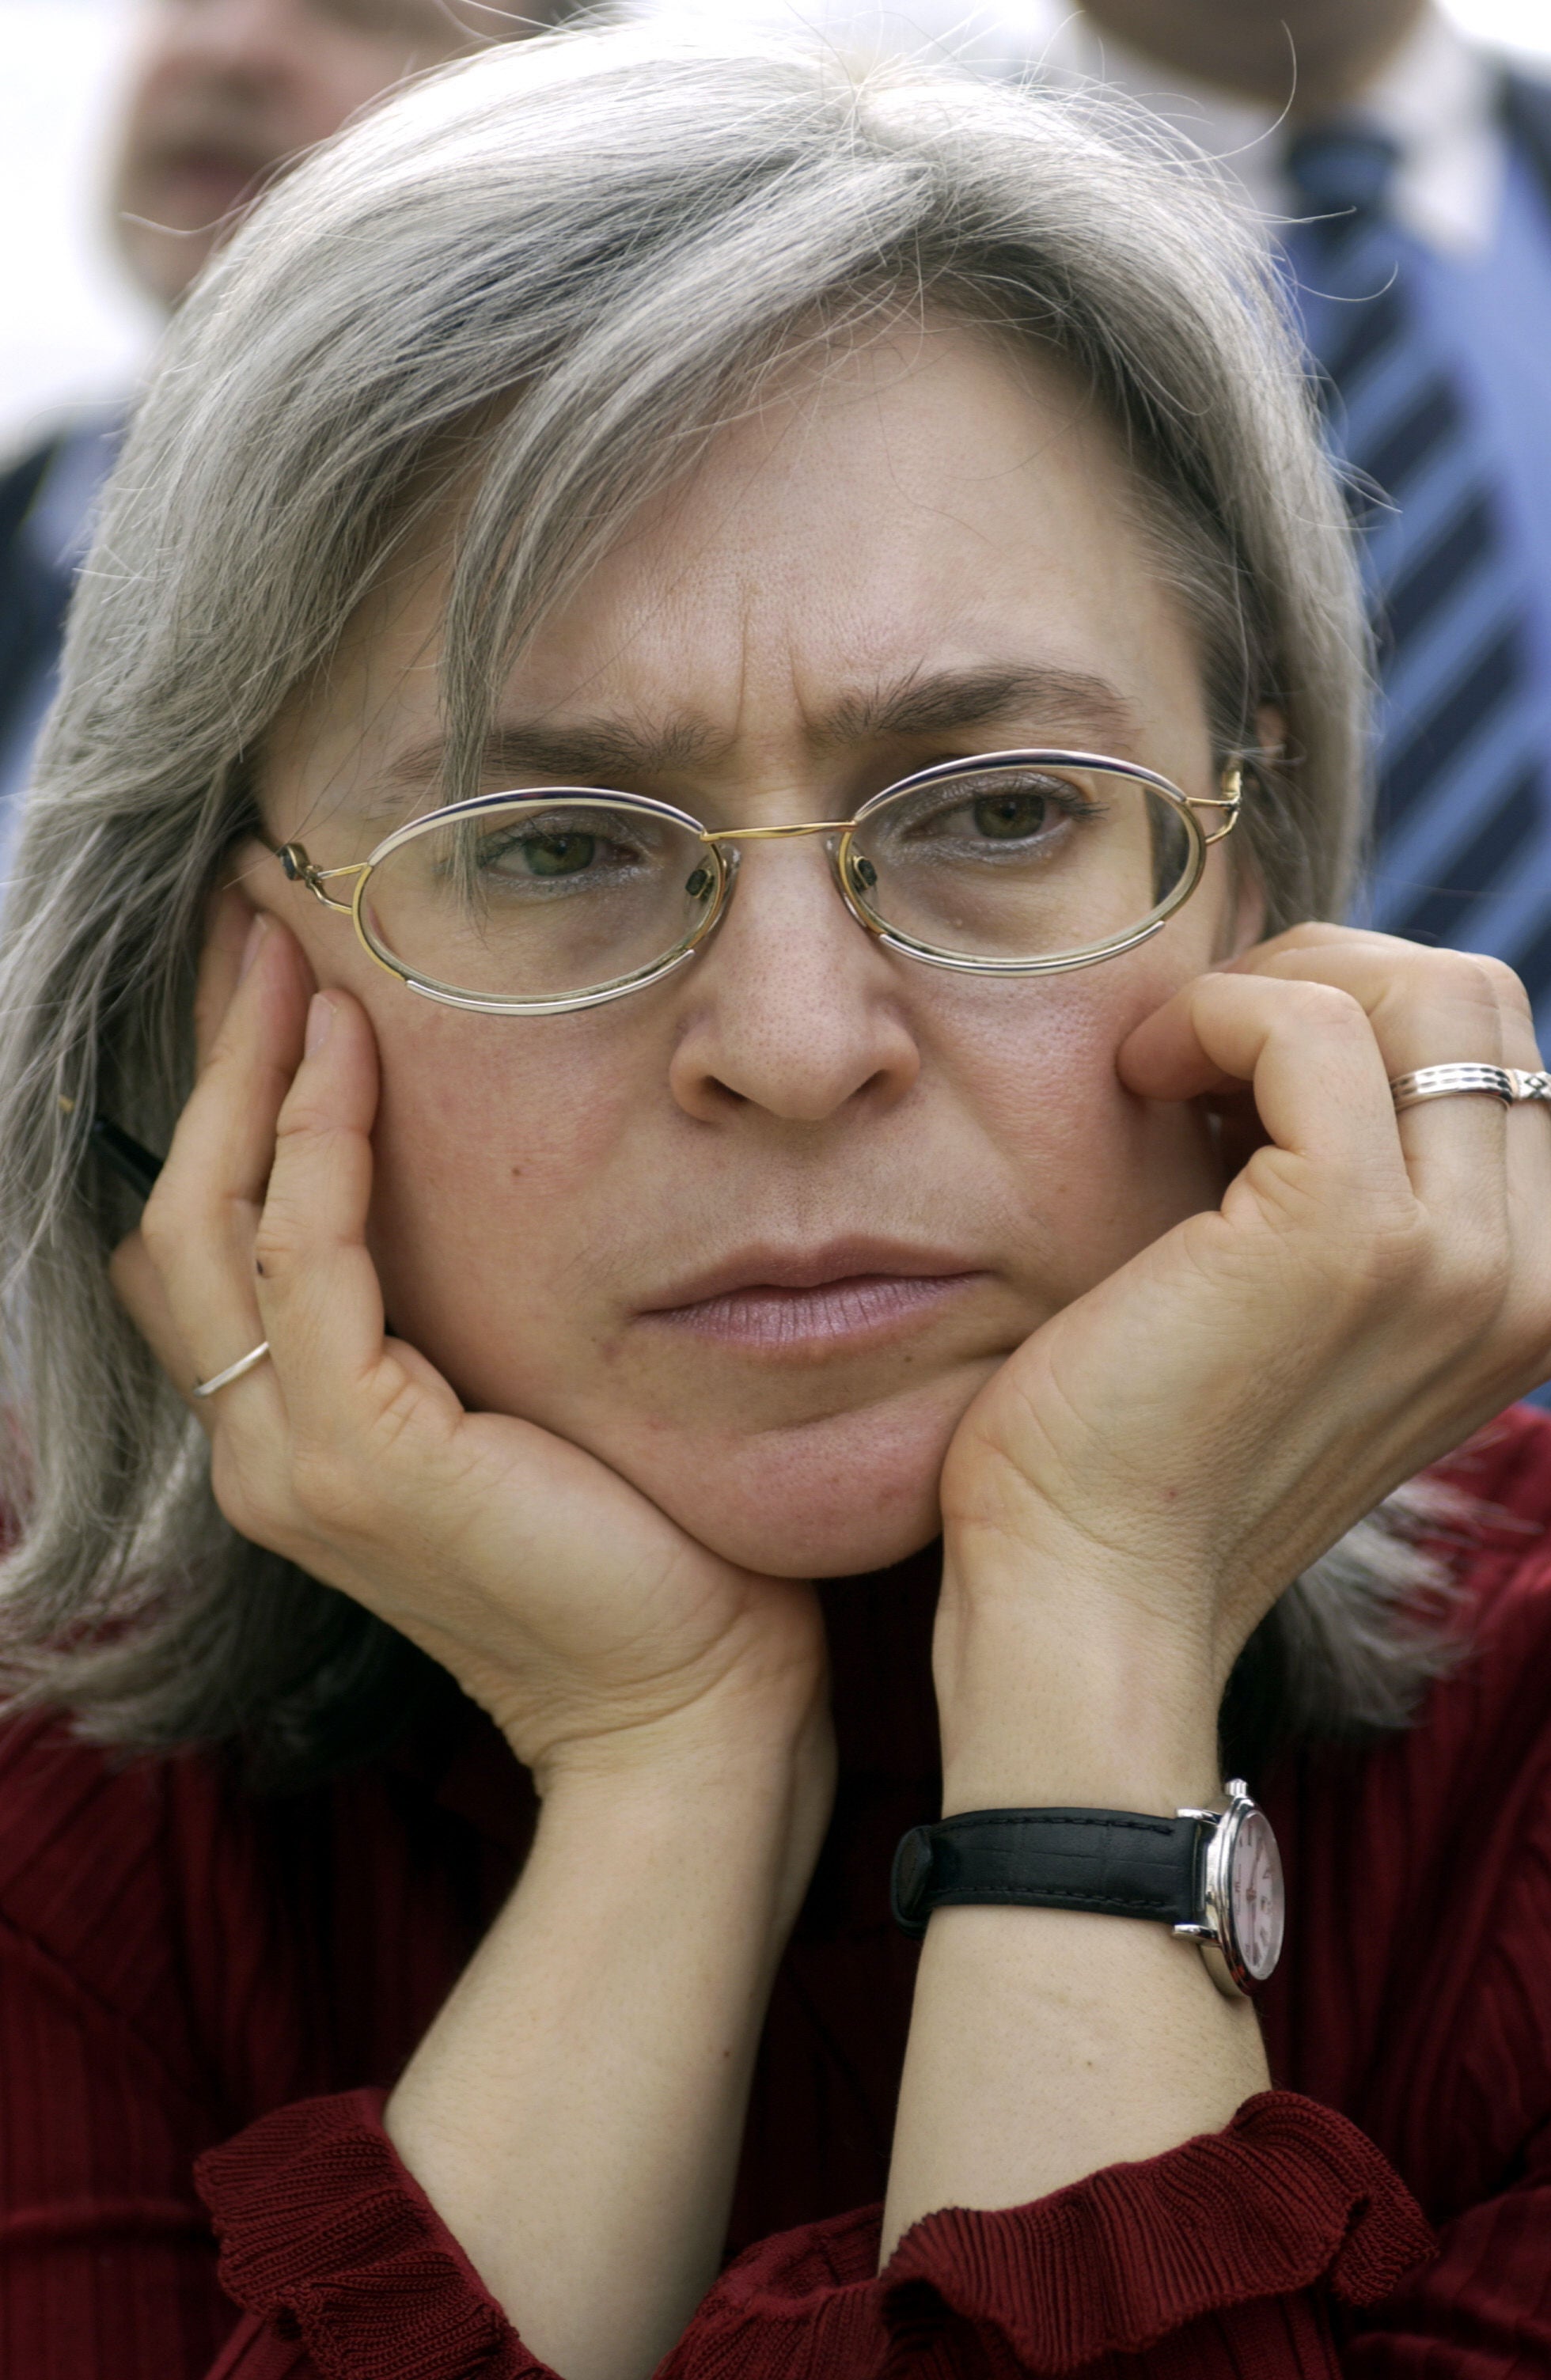 Russian human rights advocate, journalist and author Anna Politkovskaya is seen 17 March 2005 at the book fair in Leipzig, eastern Germany, where she presented her book titled ‘In Putin's Russia’